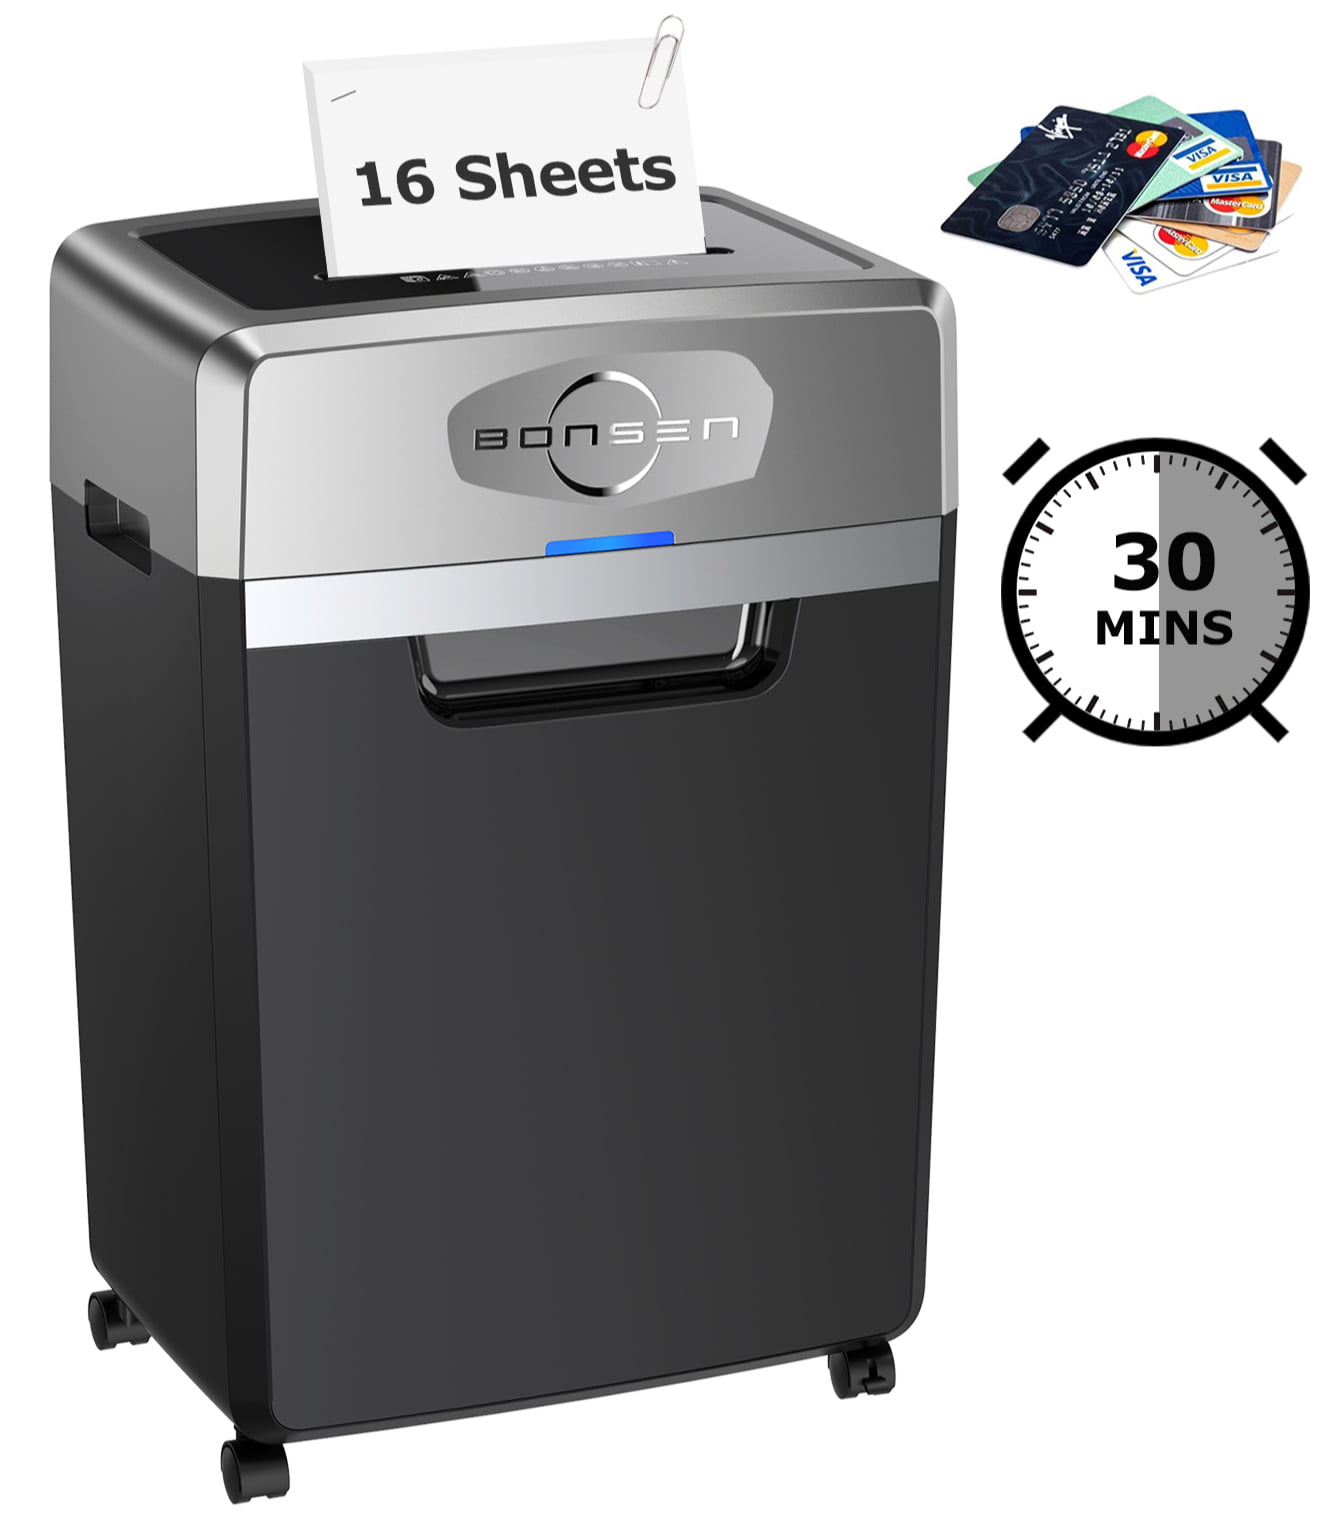 BONSEN 16-Sheet Super Micro-Cut Paper Shredder 30-Min Runing Time Ultra Quiet Commercial Shredder with 7.9-Gallon Pullout Basket & Casters High Security P-5 Heavy Duty Shredder for Office S3108 